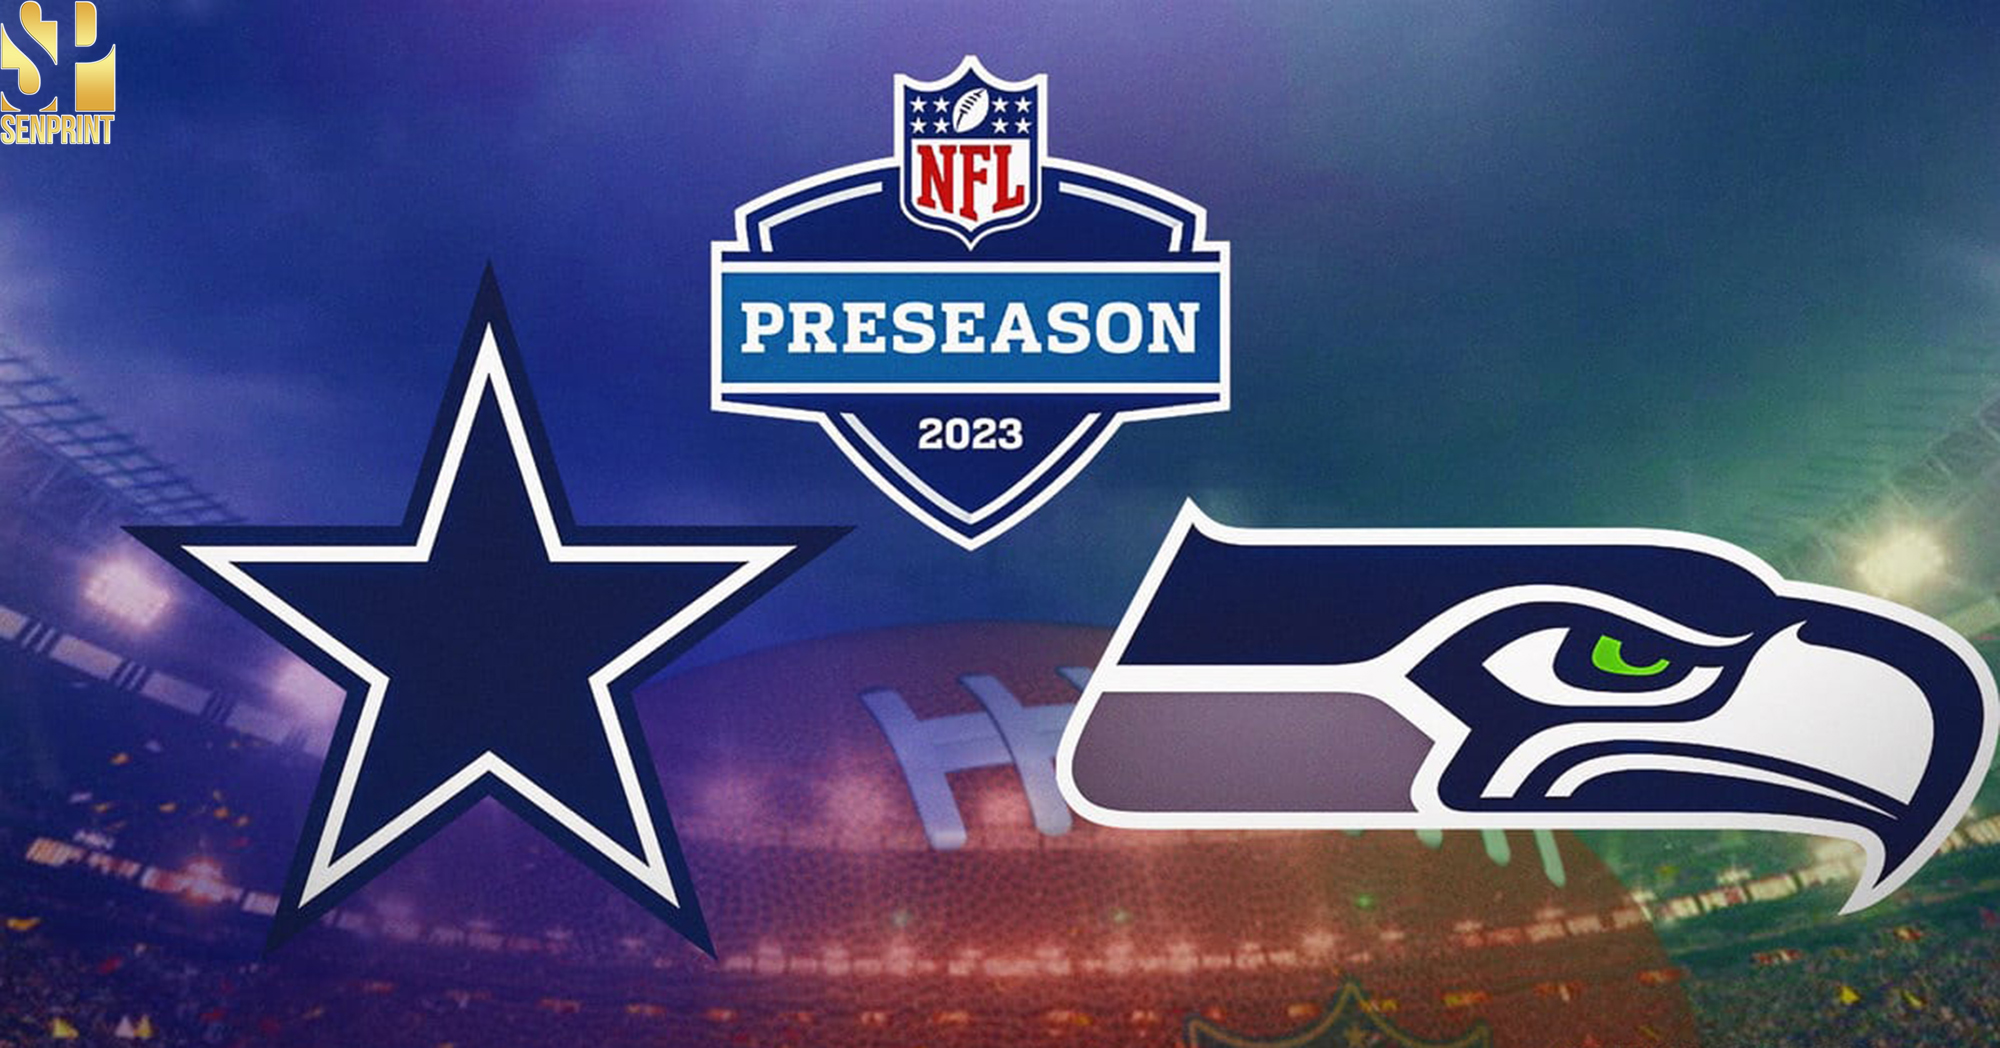 Clash of Titans Cowboys vs Seahawks in a Thrilling Thursday Night Football Showdown for Week 13 of Super Bowl LVII